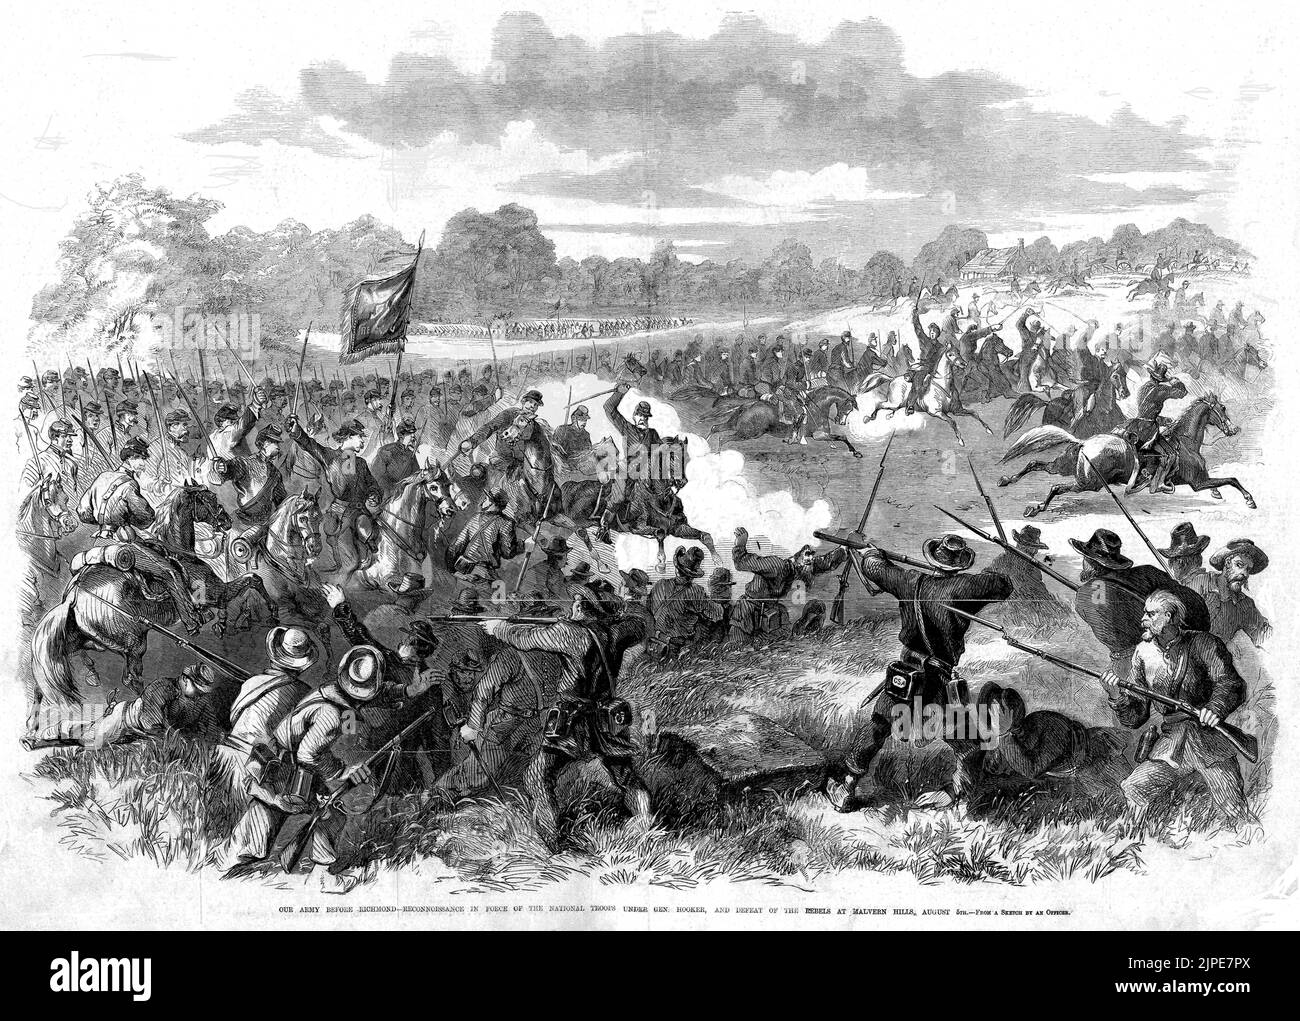 Our Army Before Richmond - Reconnaissance in Force of the National Troops Under General Joseph Hooker, and Defeat of the Rebels at Malvern Hills, August 5th (1862) American Civil War illustration from Frank Leslie's Illustrated Newspaper Stock Photo